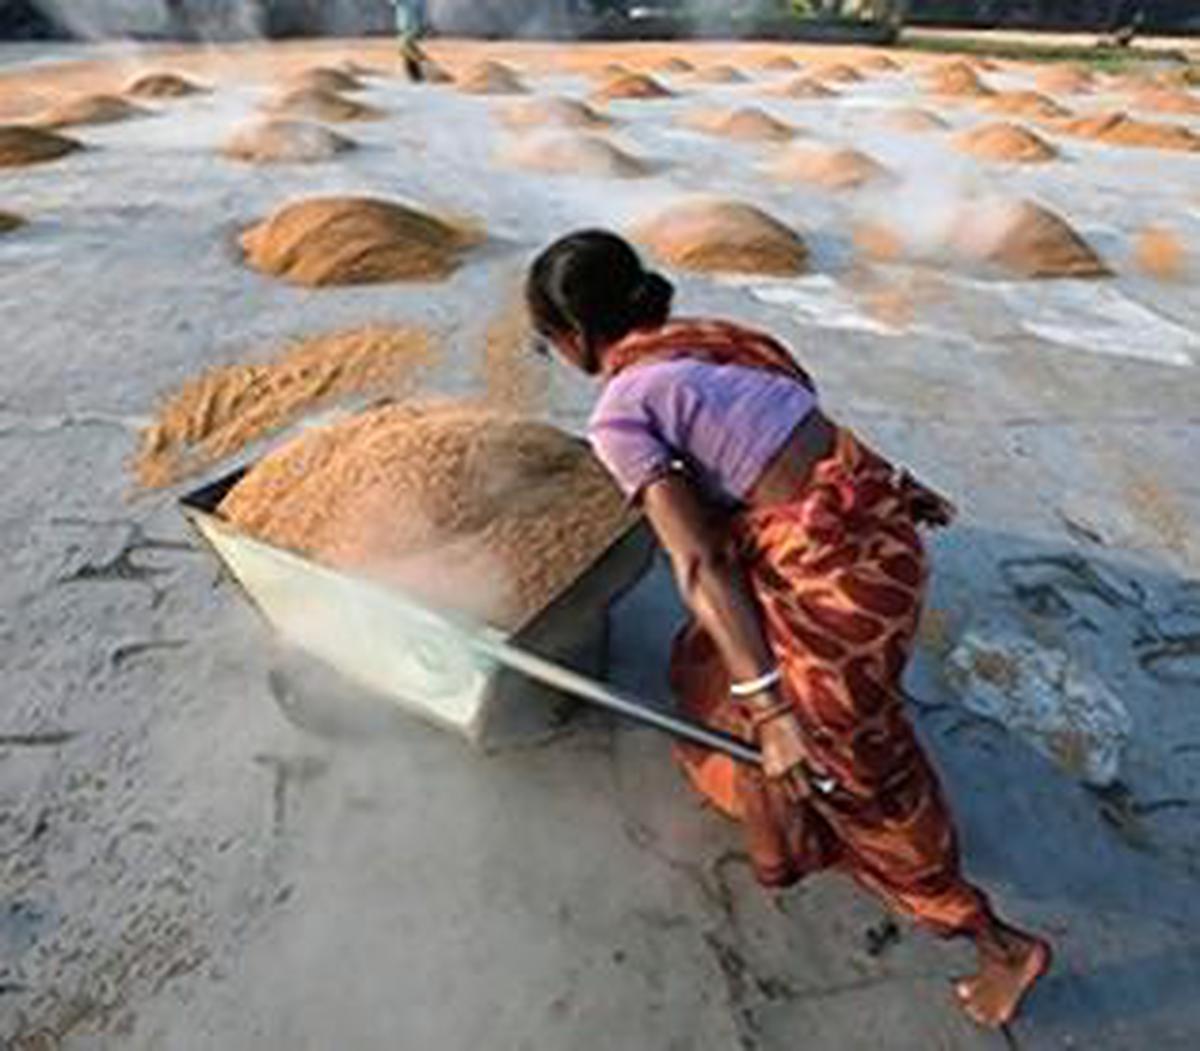 Featured image for "Customs officials seeking 20% duty payment, classifying commodity as raw rice based on appearance; association demurs Almost 1,000 tonnes of parboiled rice – which is used to make idlis –"